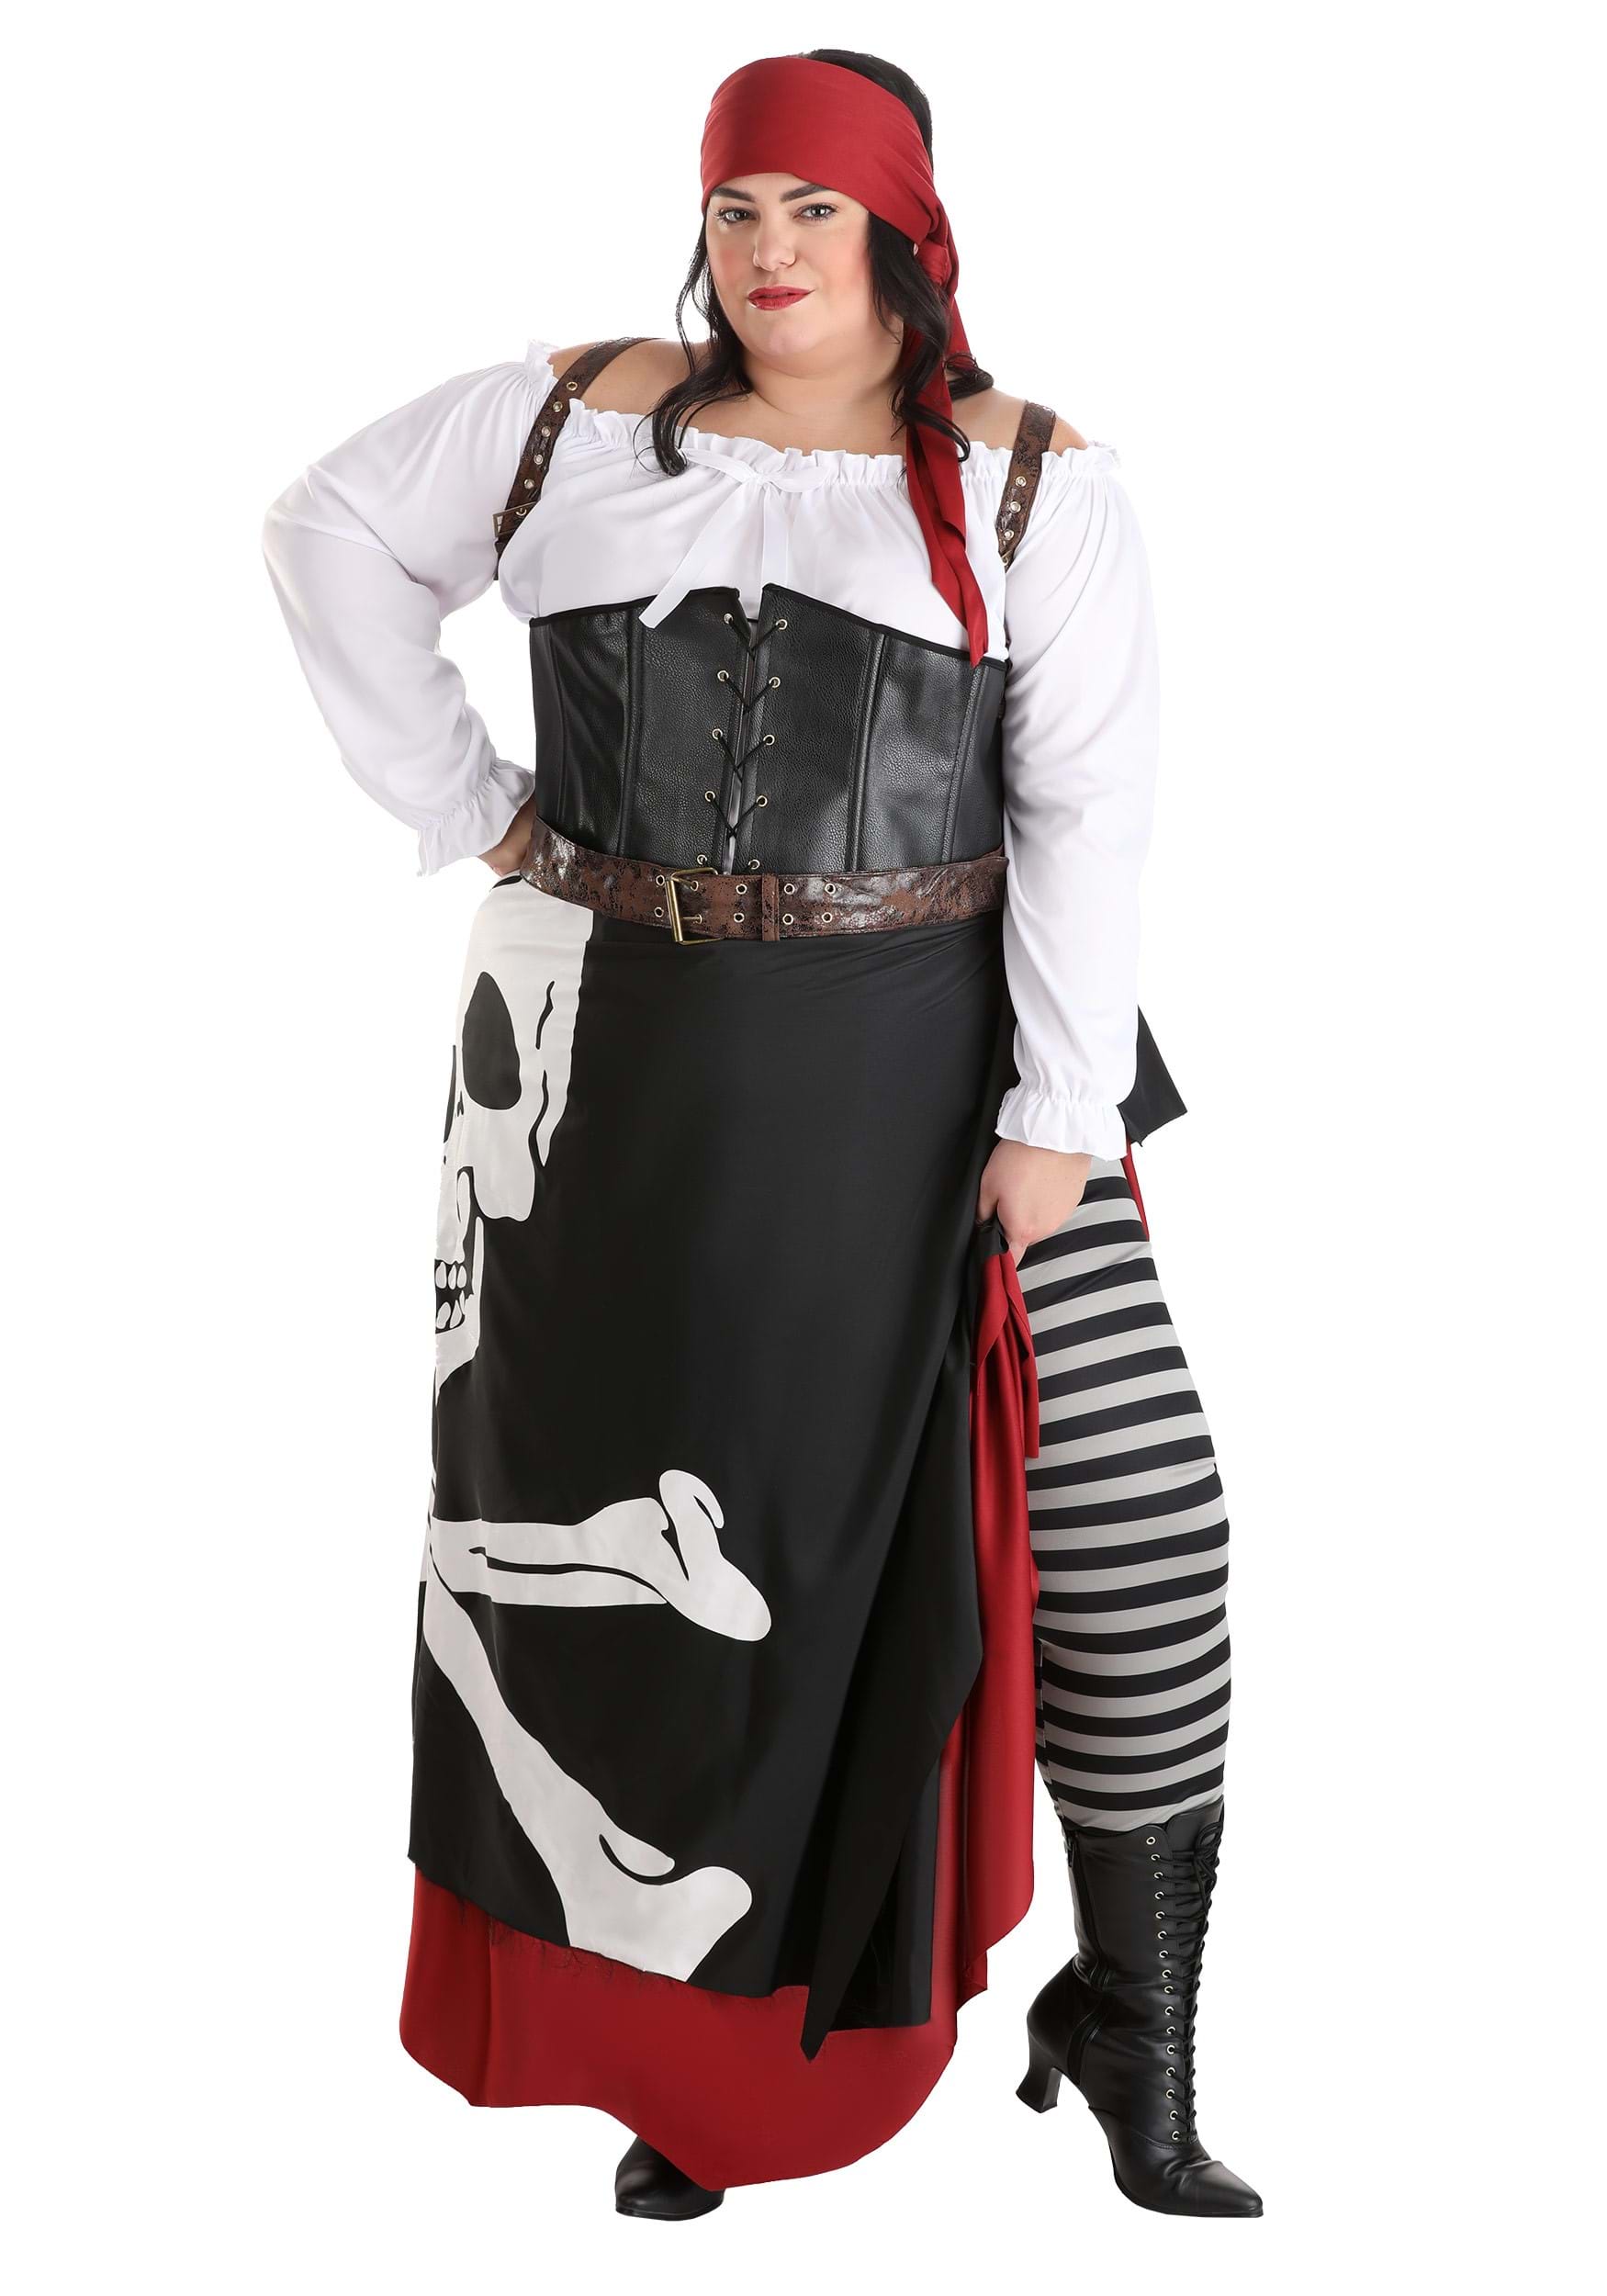 https://images.halloweencostumes.ca/products/33320/2-1-301577/plus-size-womens-pirate-flag-gypsy-costume-alt-7.jpg